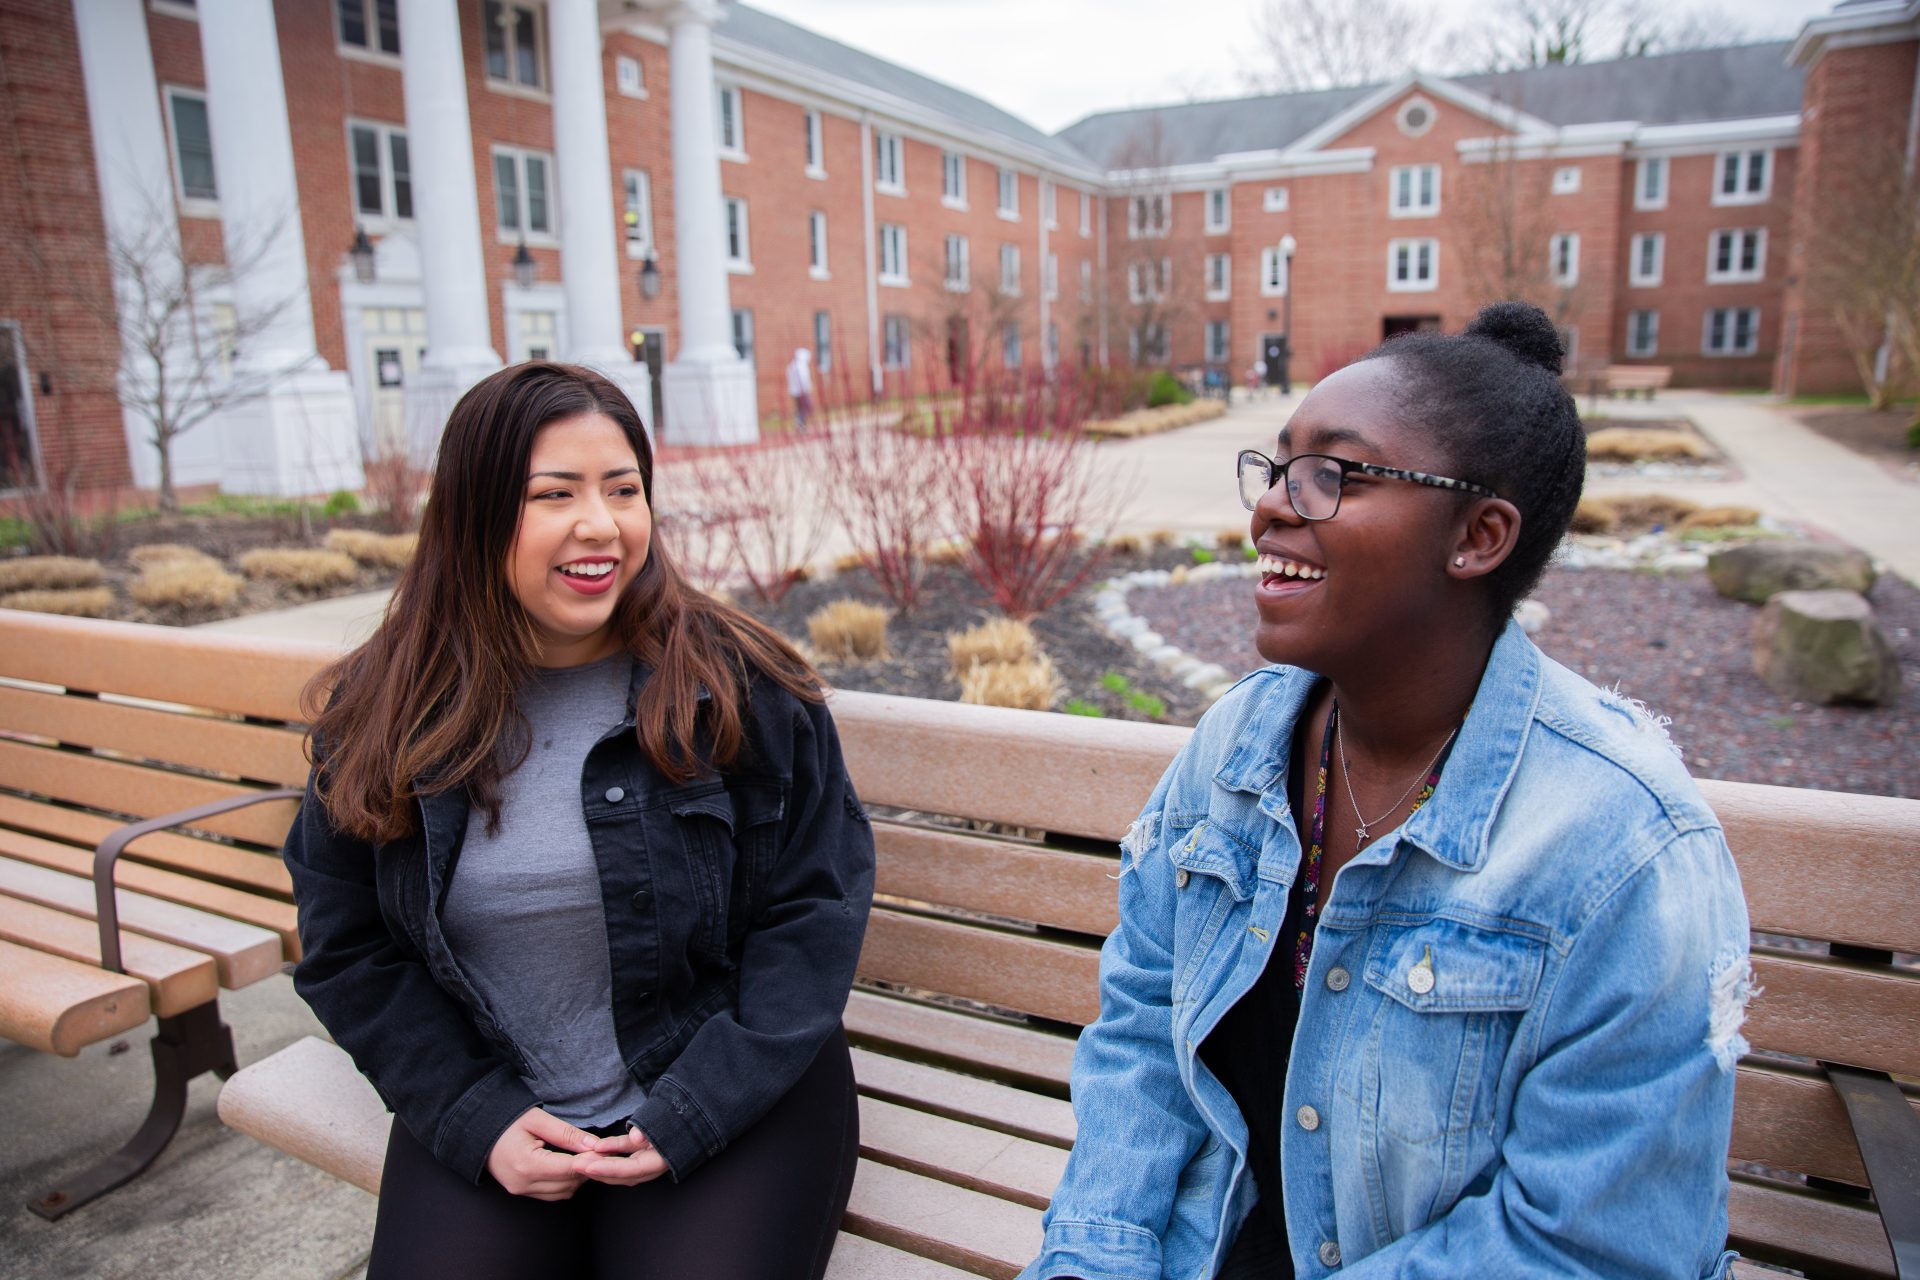 Jenn Cruz and Edris Forde laughing on a bench outside Chestnut Hall.